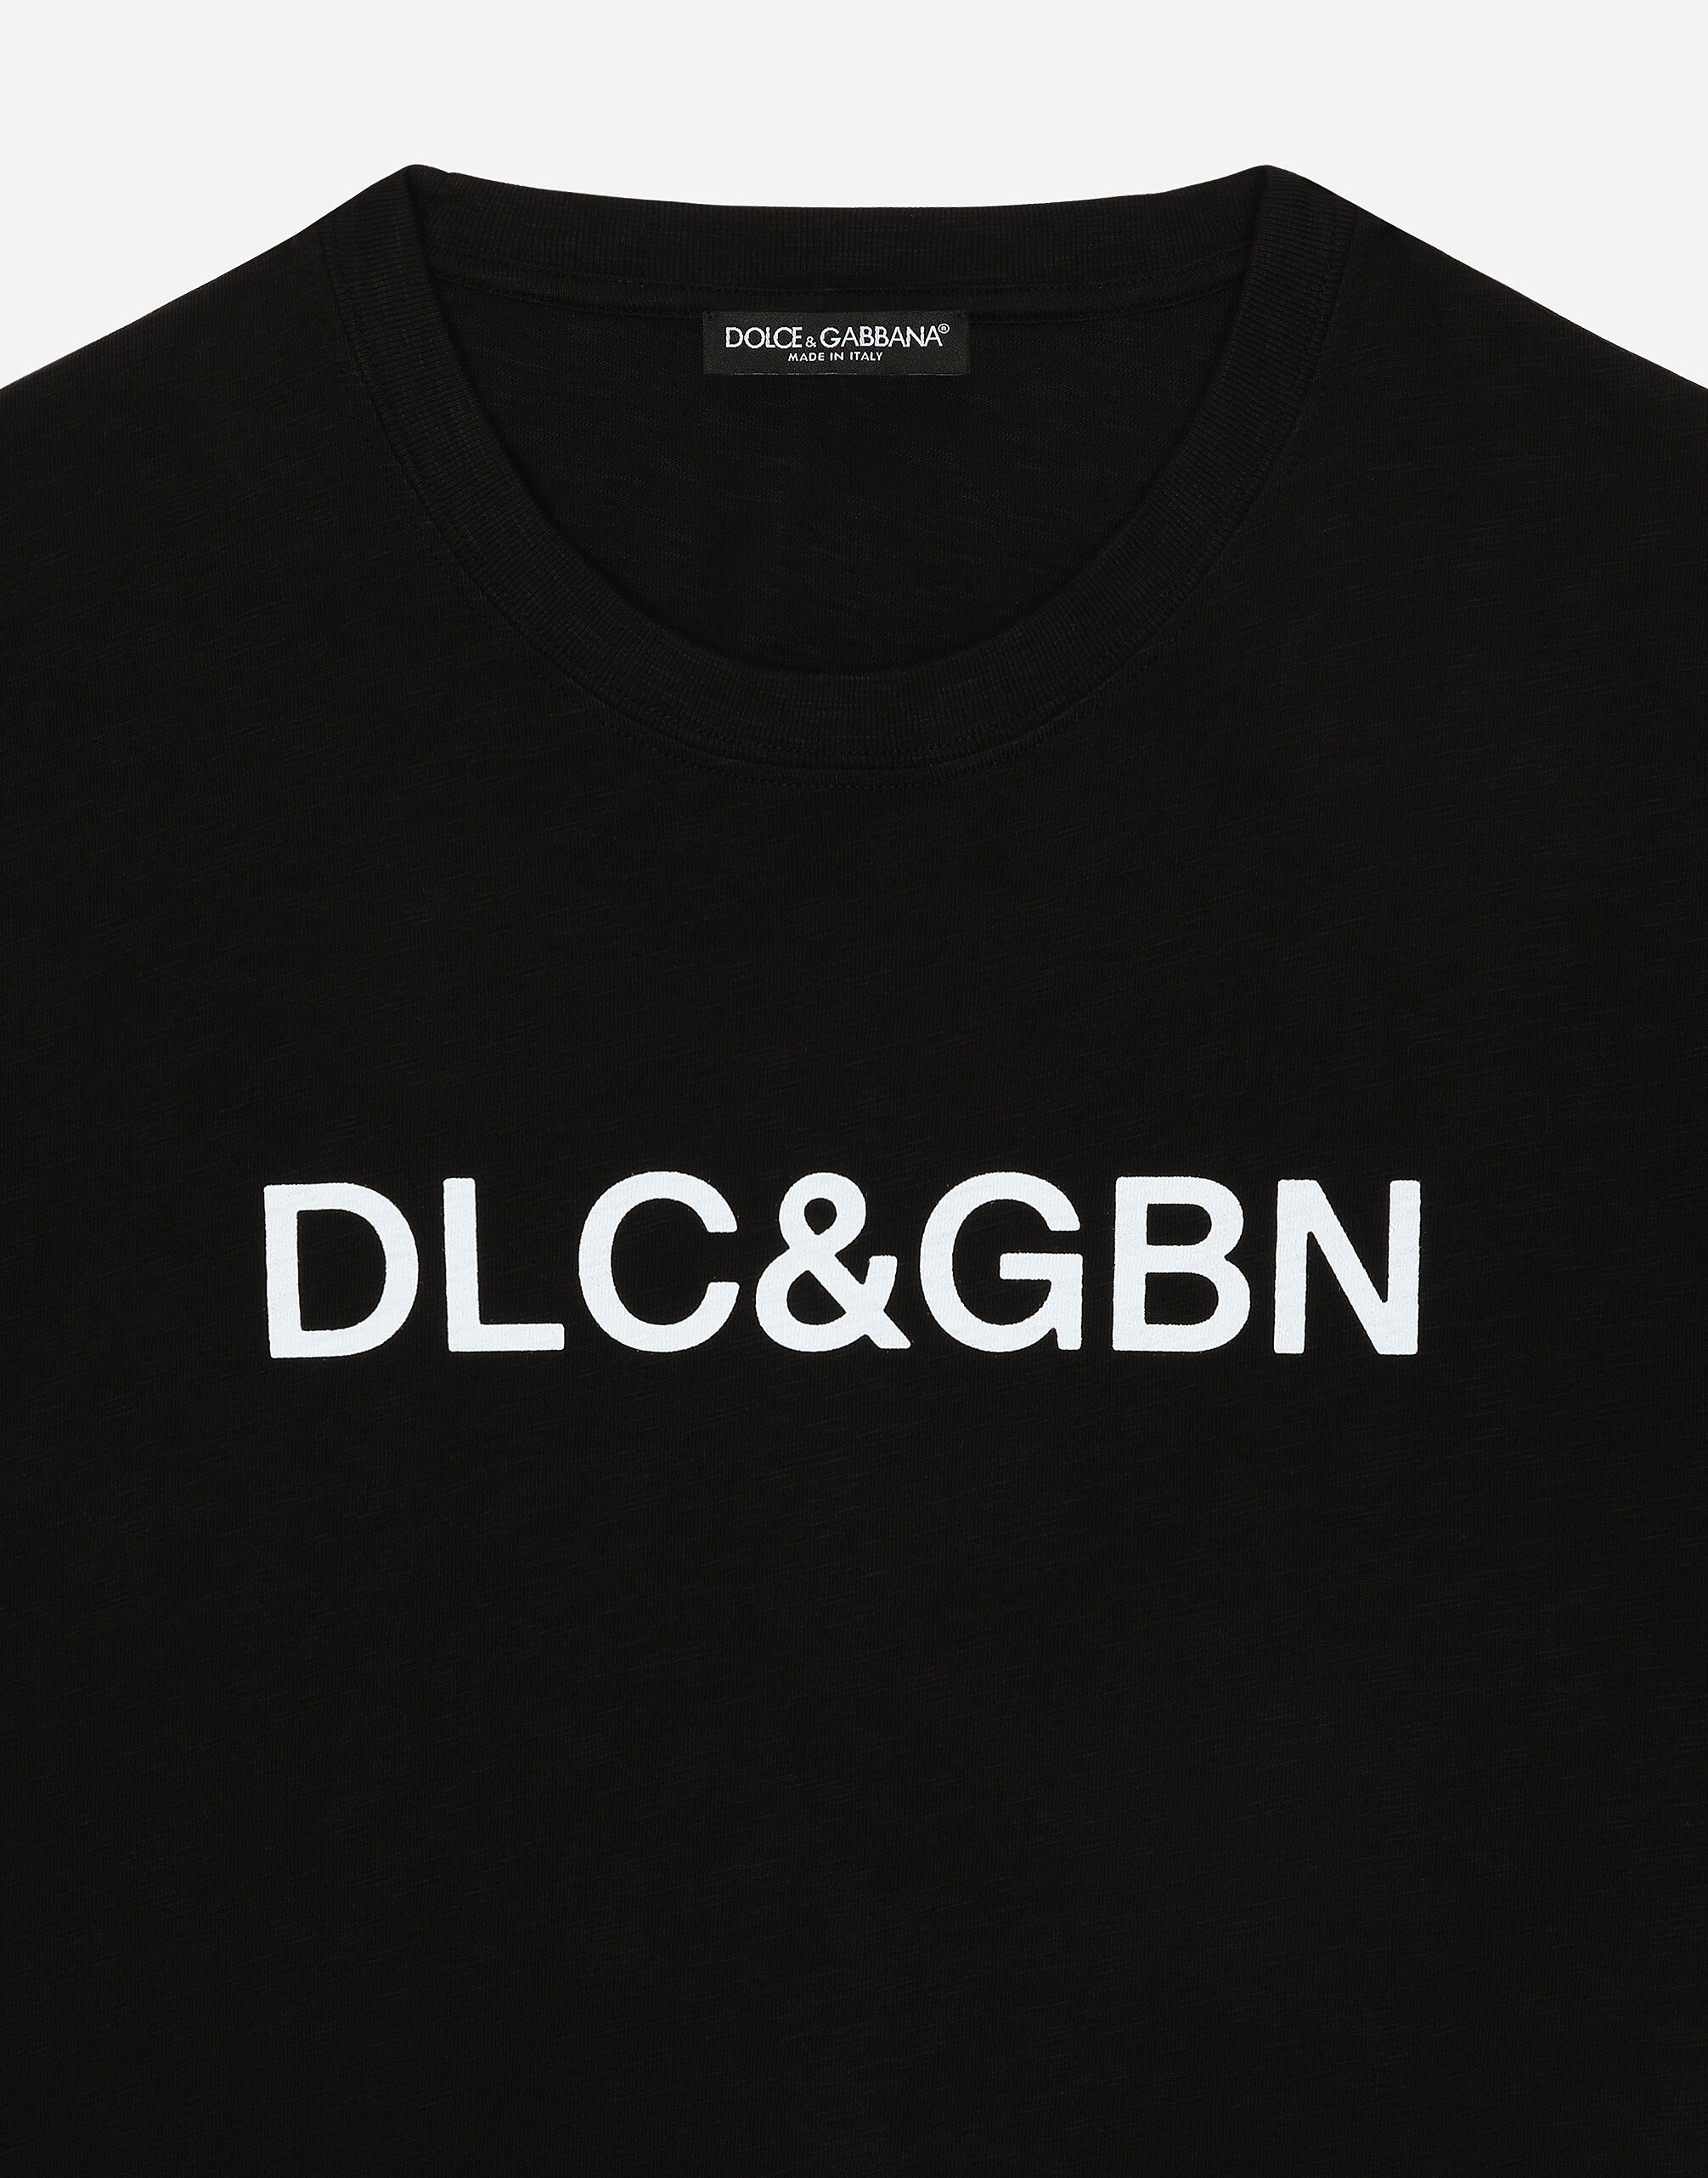 Cotton T-shirt with Dolce&Gabbana logo in Black for